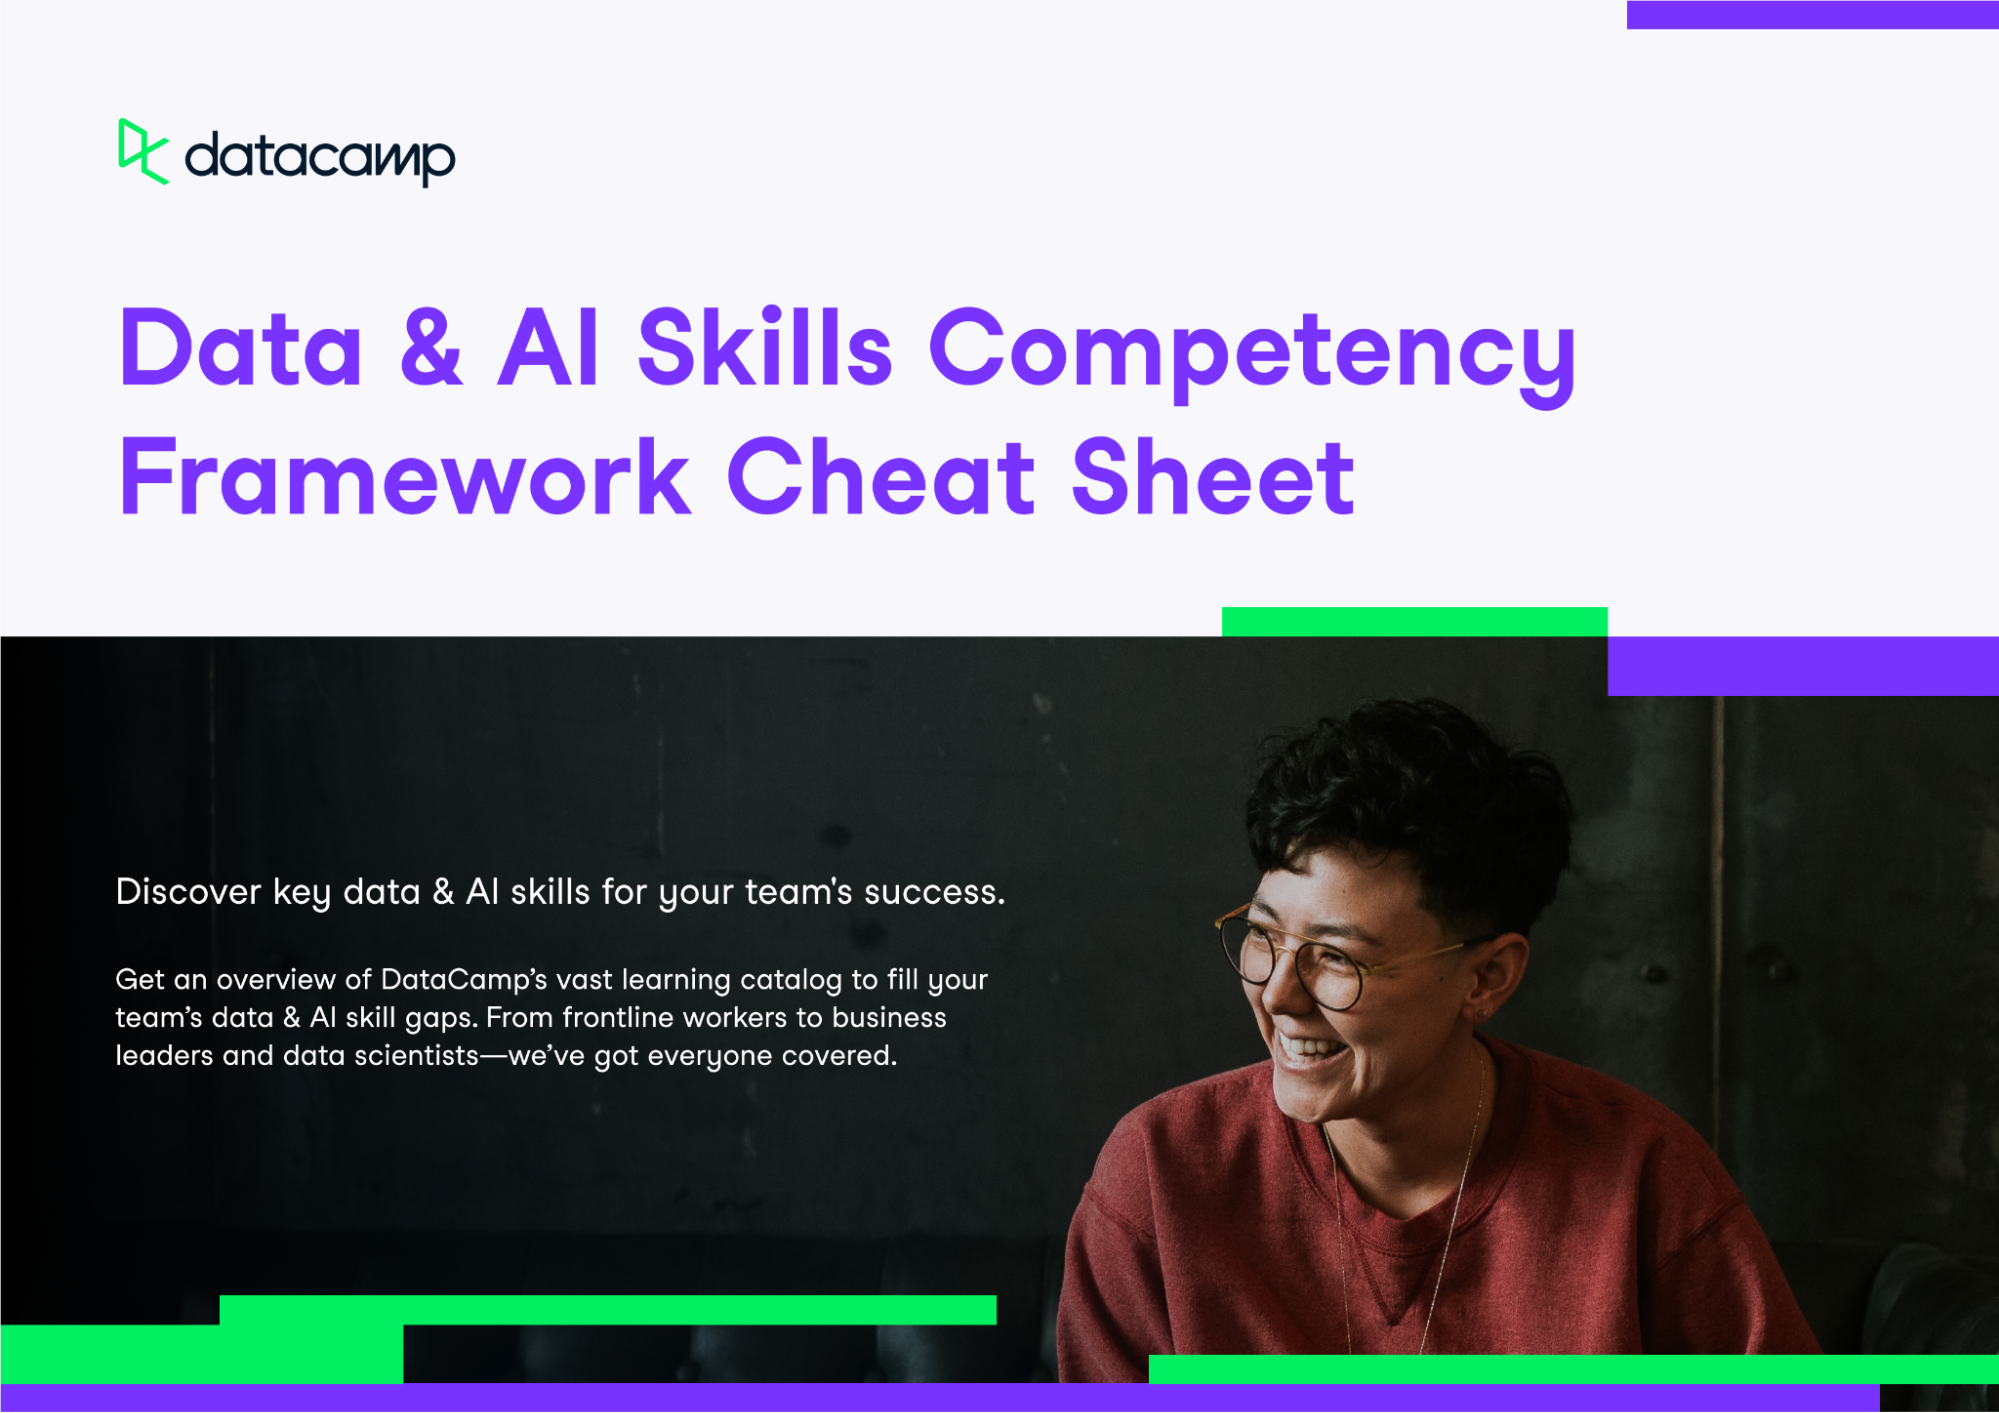 Download our Data & AI Competencies Cheat Sheet